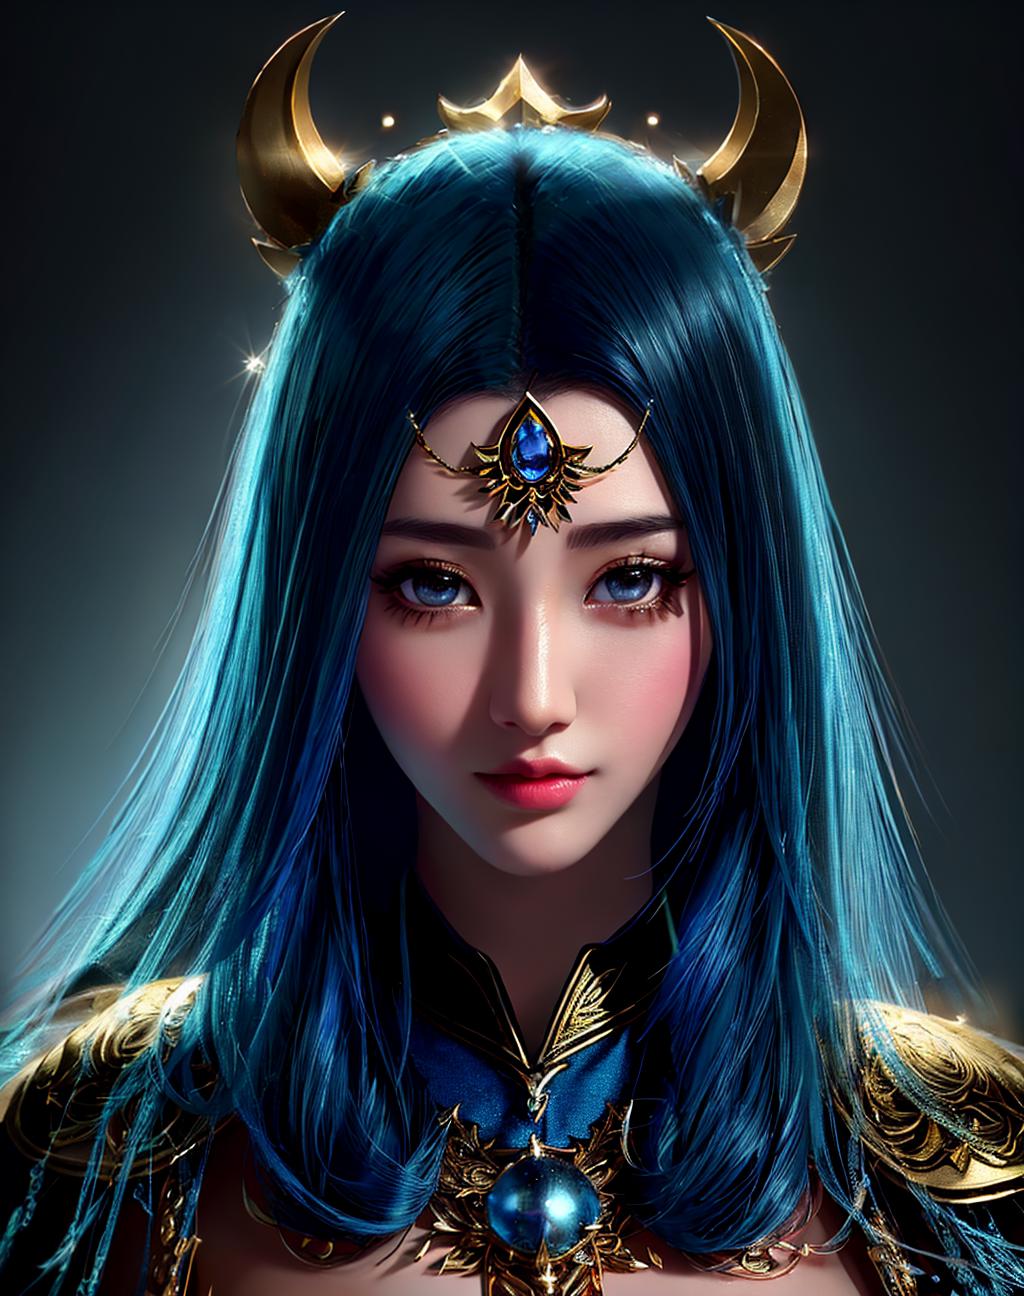 Artistic Eastern Fantasy Armor and Dress image by EDG